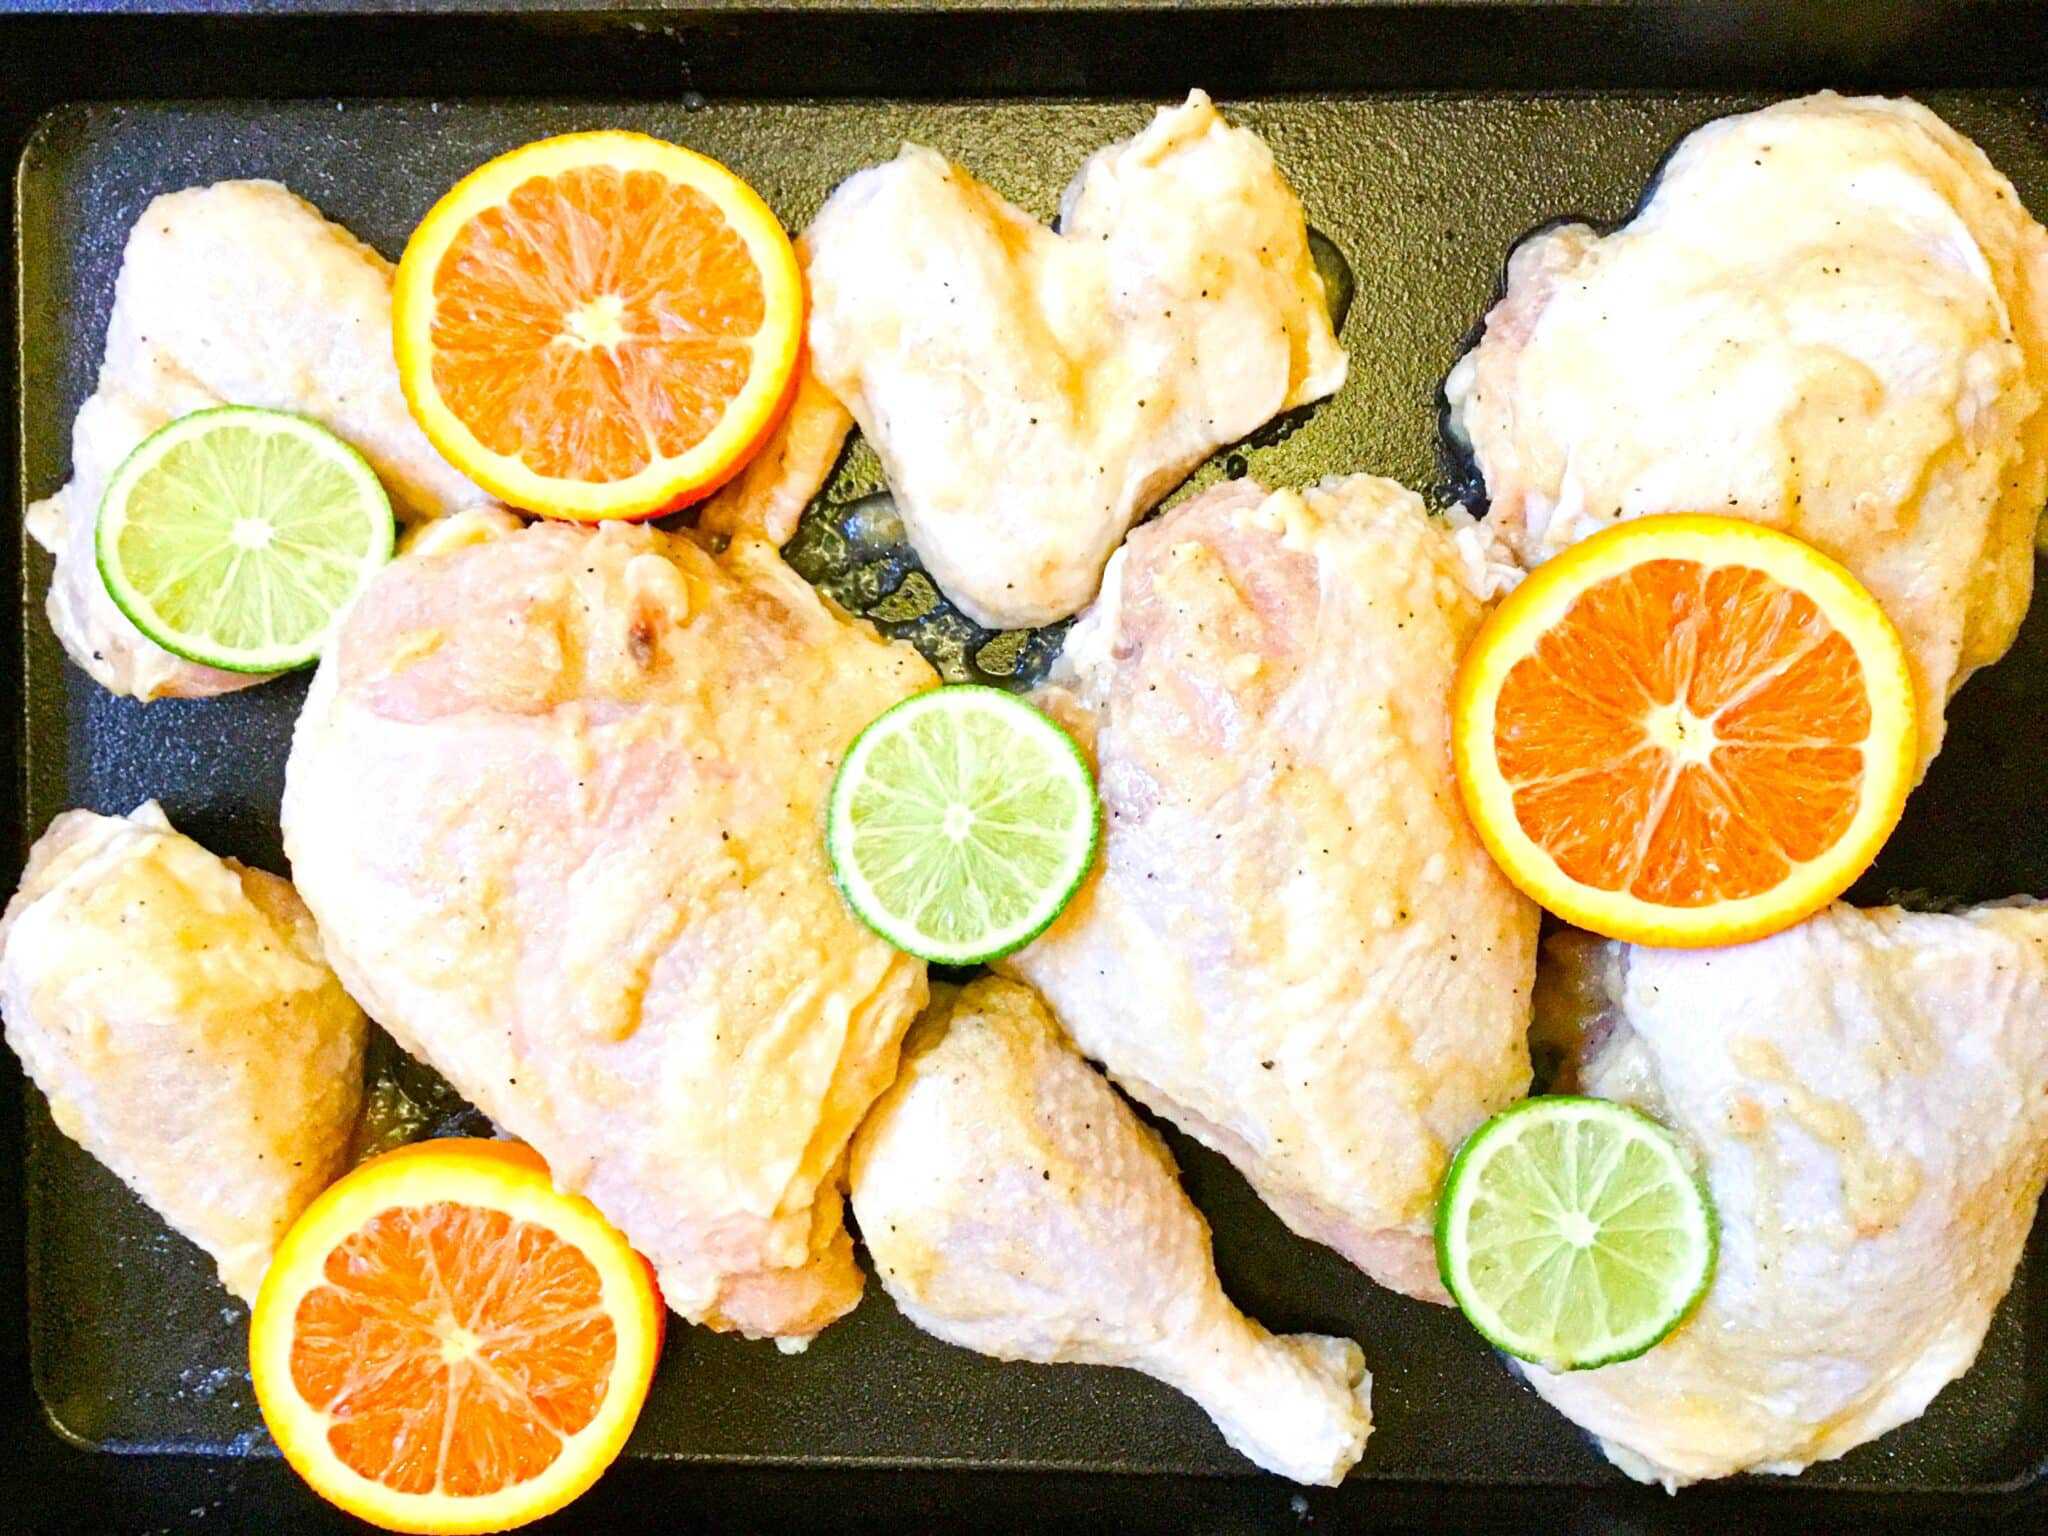 whole chicken cut in 8 pieces sweet and sour chicken marinated in lime and orange juice on a sheet pan ready to bake